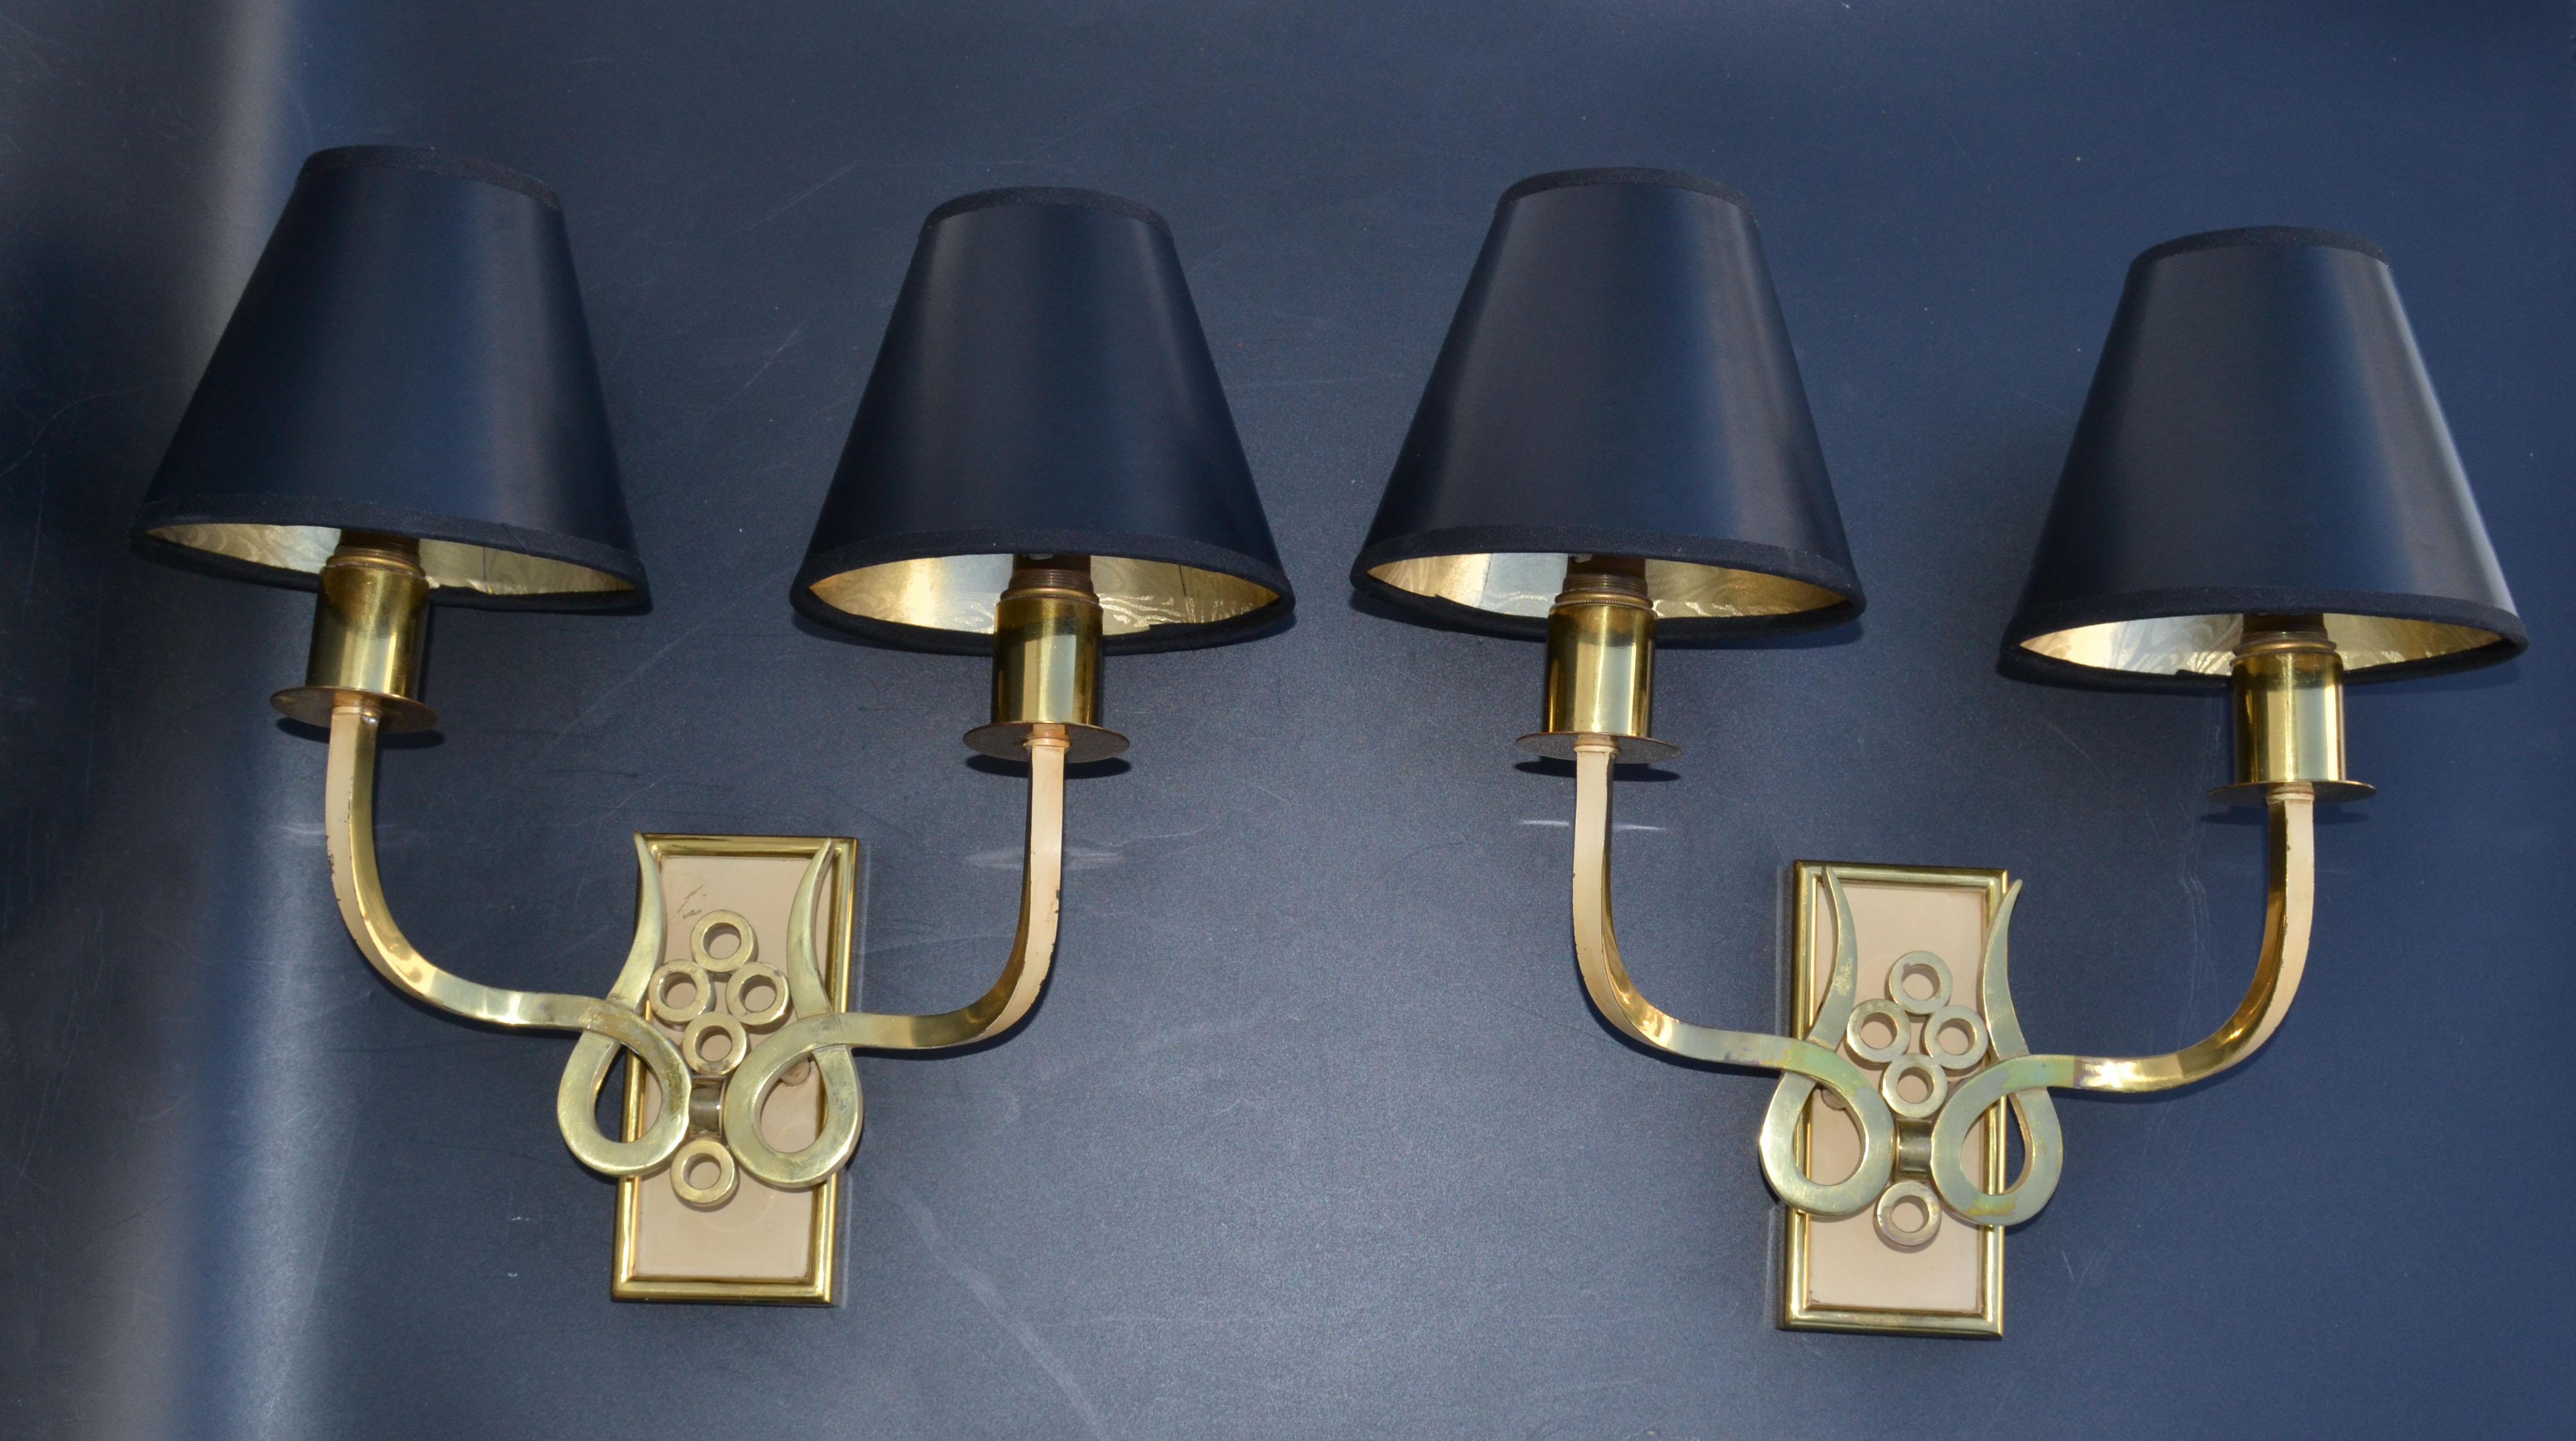 French Bronze & Brass Sconces by Maison Jansen Black & Gold Paper Shade, Pair For Sale 10